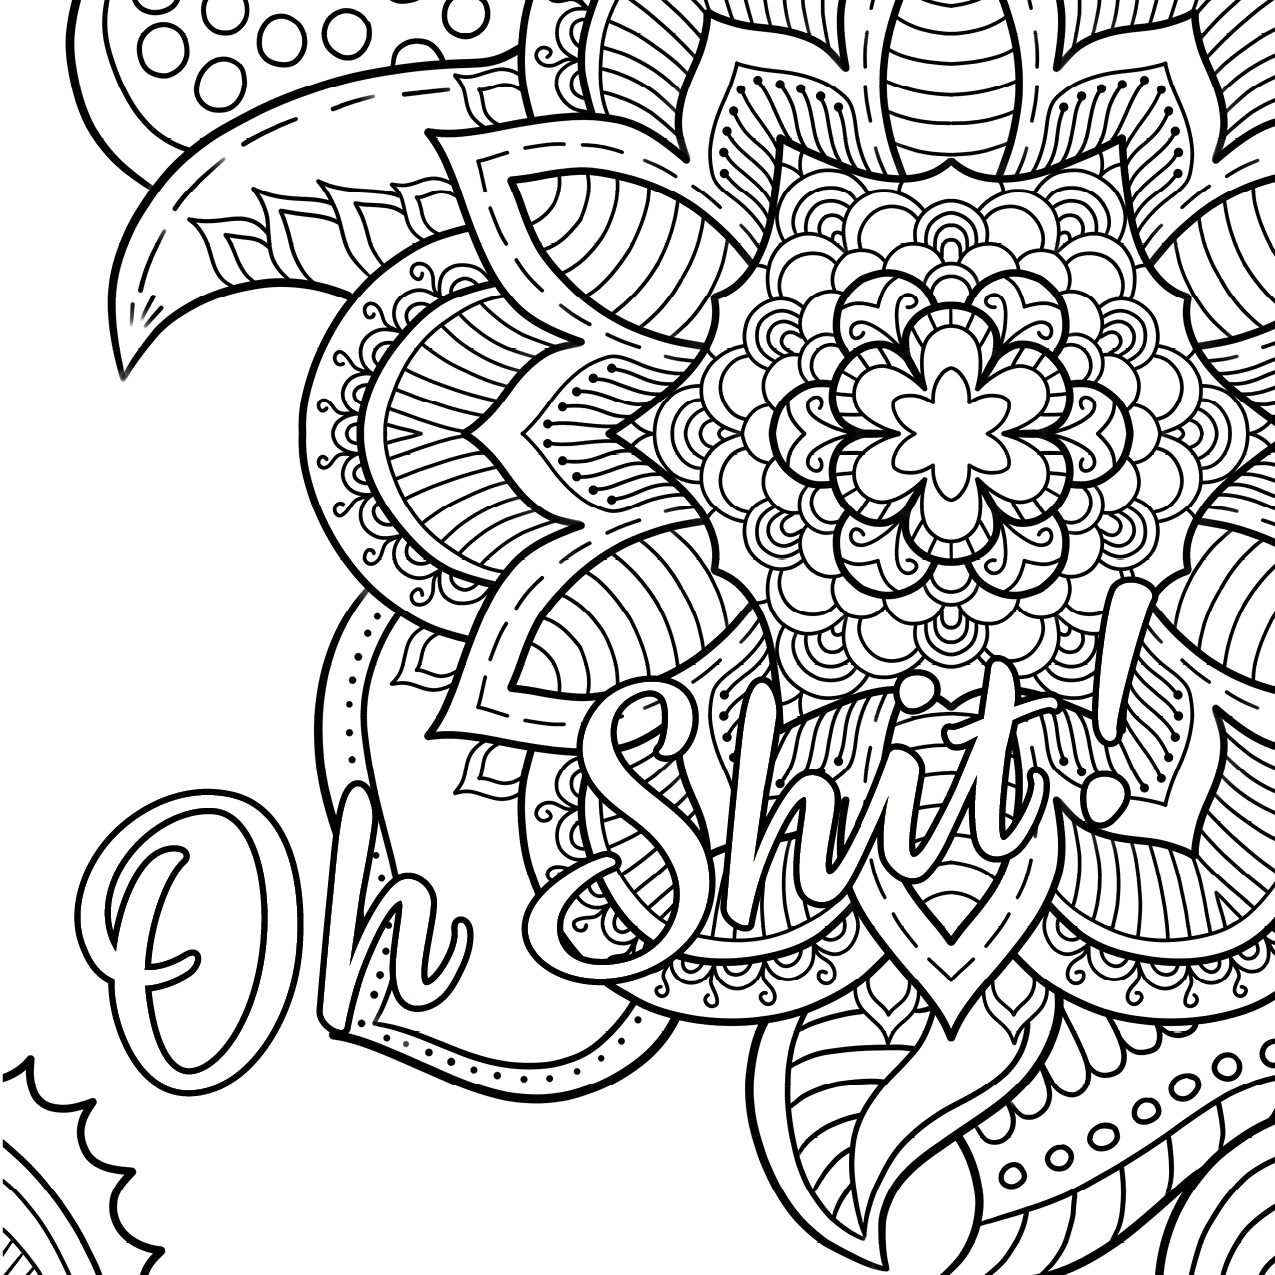 Oh Shit Free Coloring Page Swear Word Book Thiago Pages For Kids Online  Adults – azspring